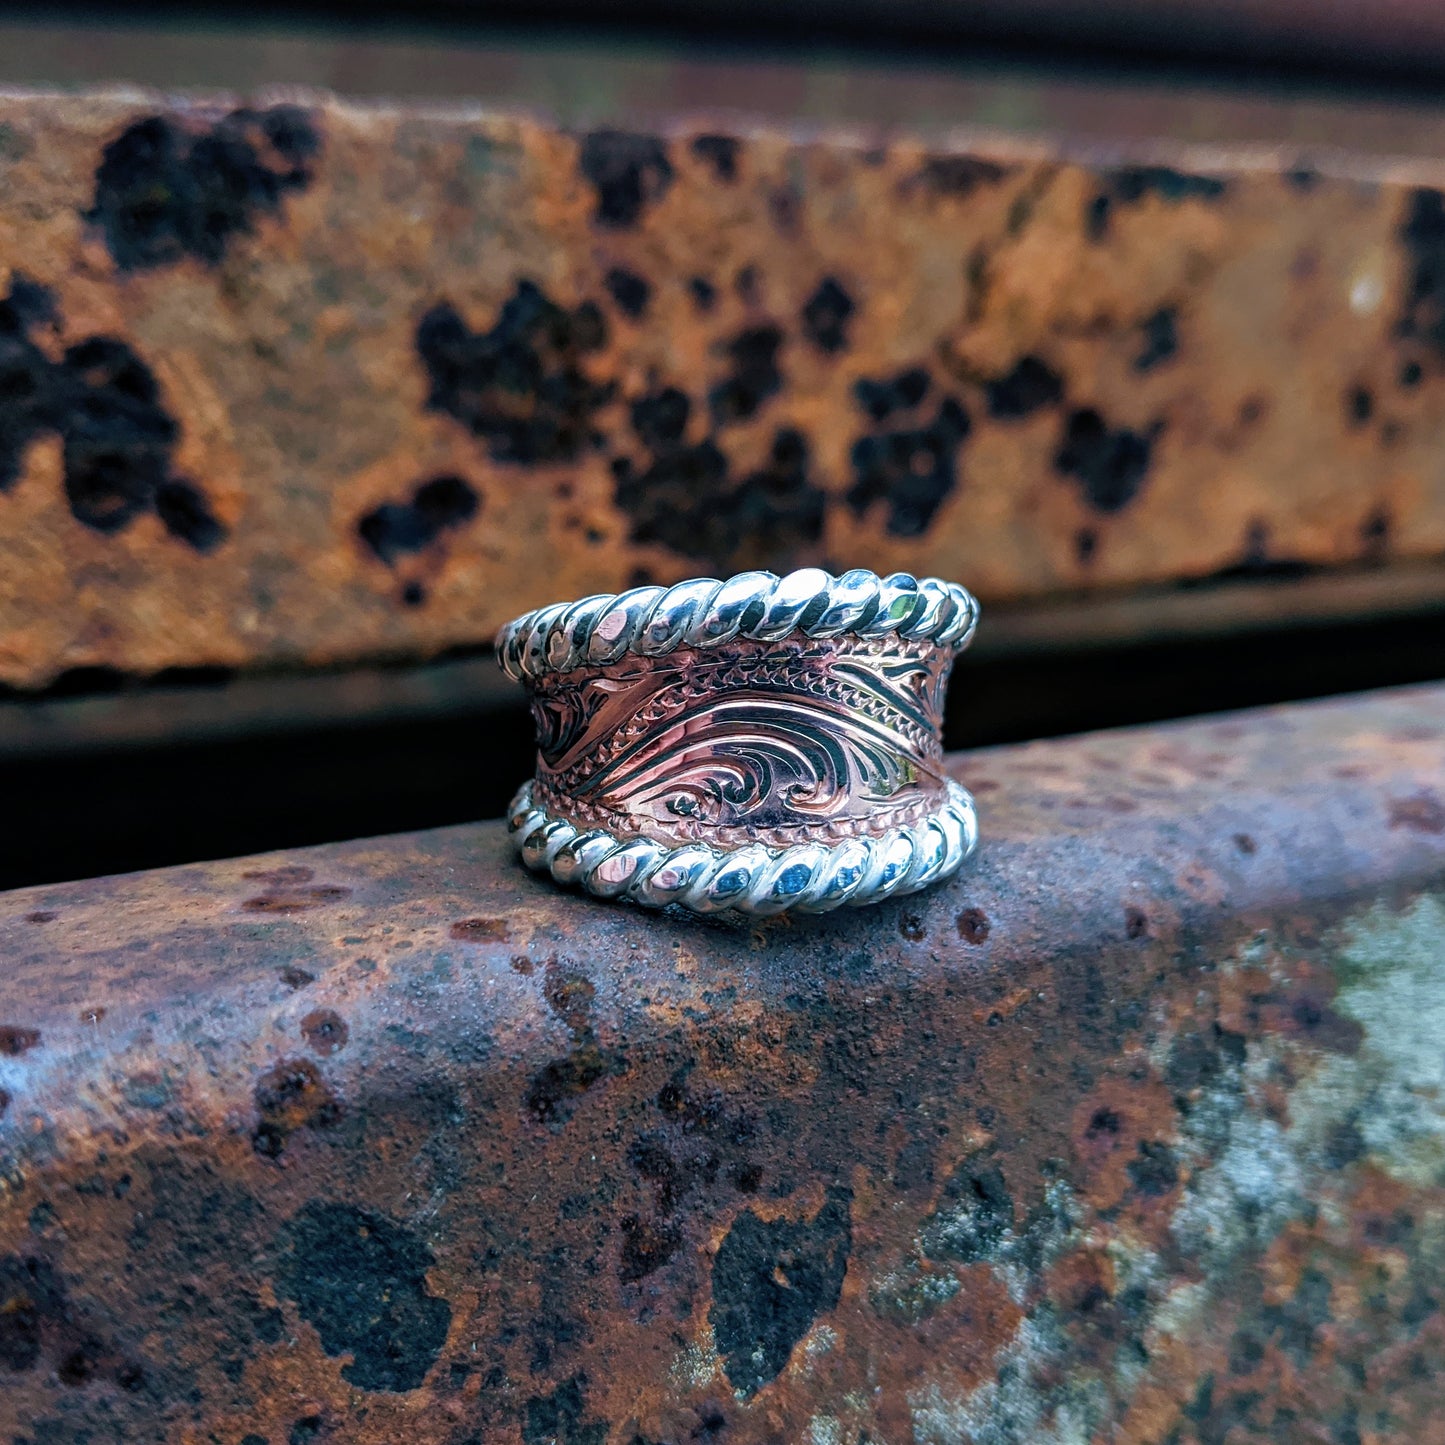 Copper Hand-Engraved Wriggle Line/Leaf Western Ring, Sterling Silver Rope Edge, Western Band Design RNG00033 by Loreena Rose